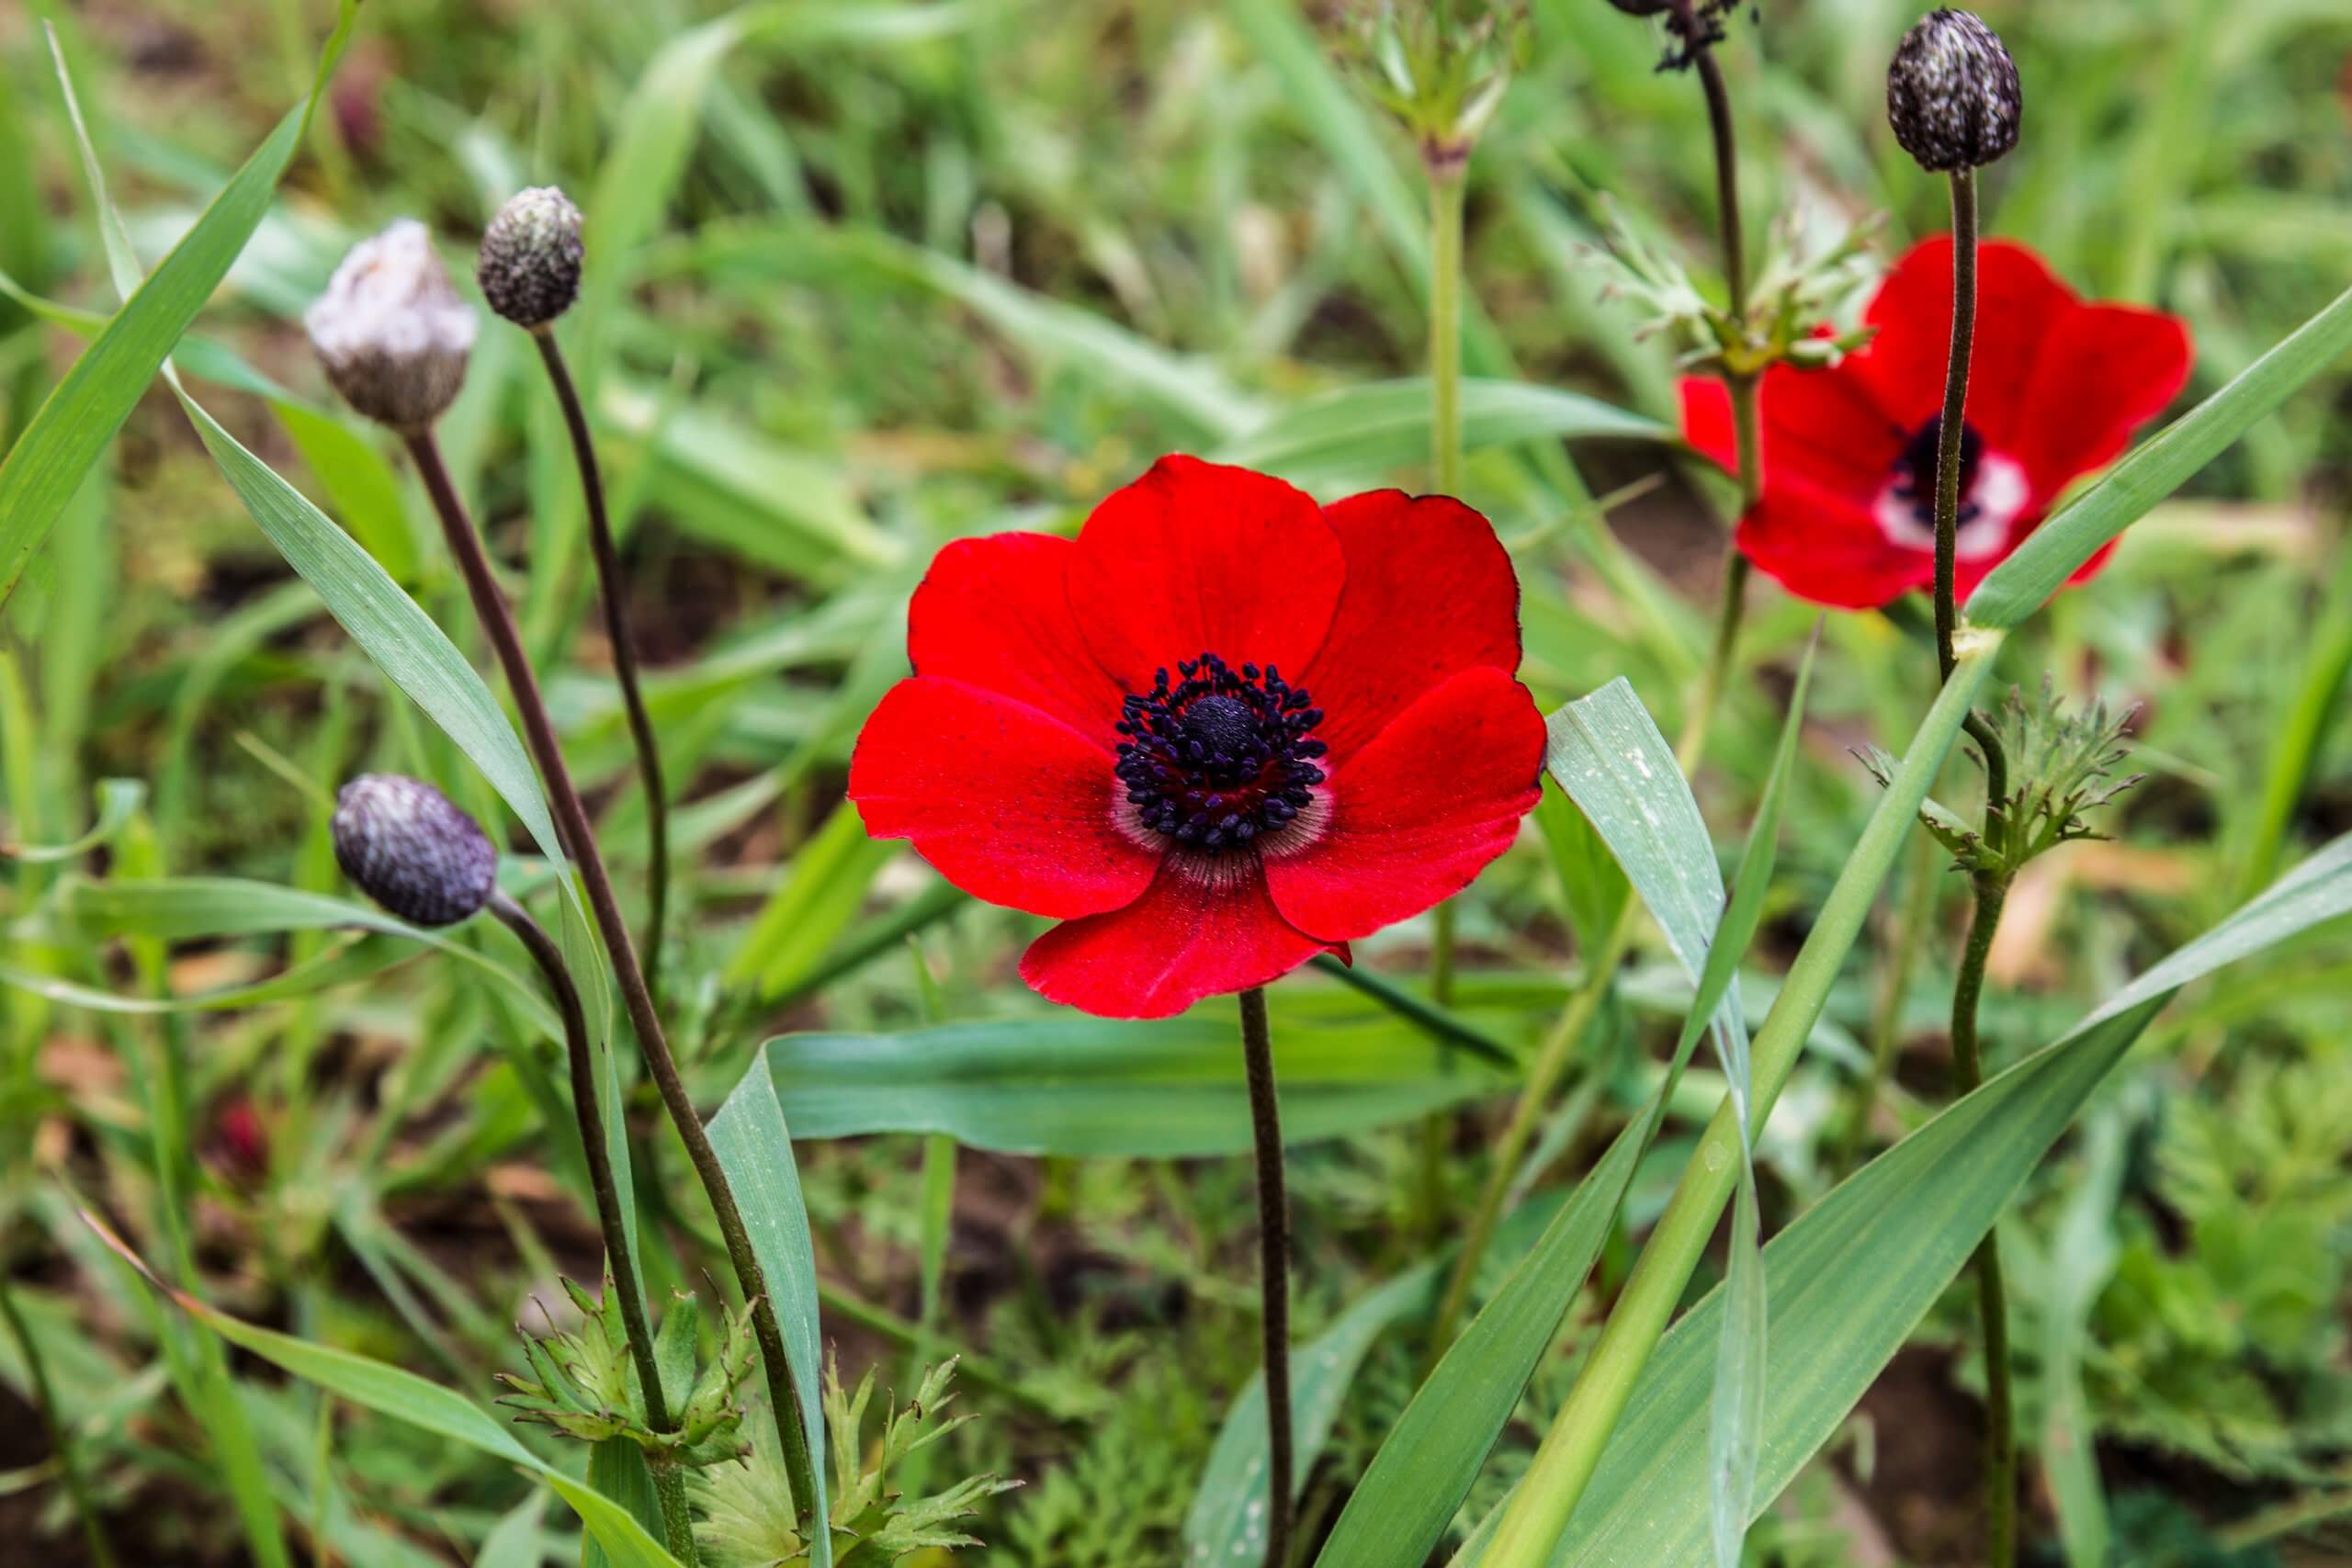 Red,Blooming,Anemones,On,A,Sunny,Summer,Day, rode herfstanemoon Anemone coronaria